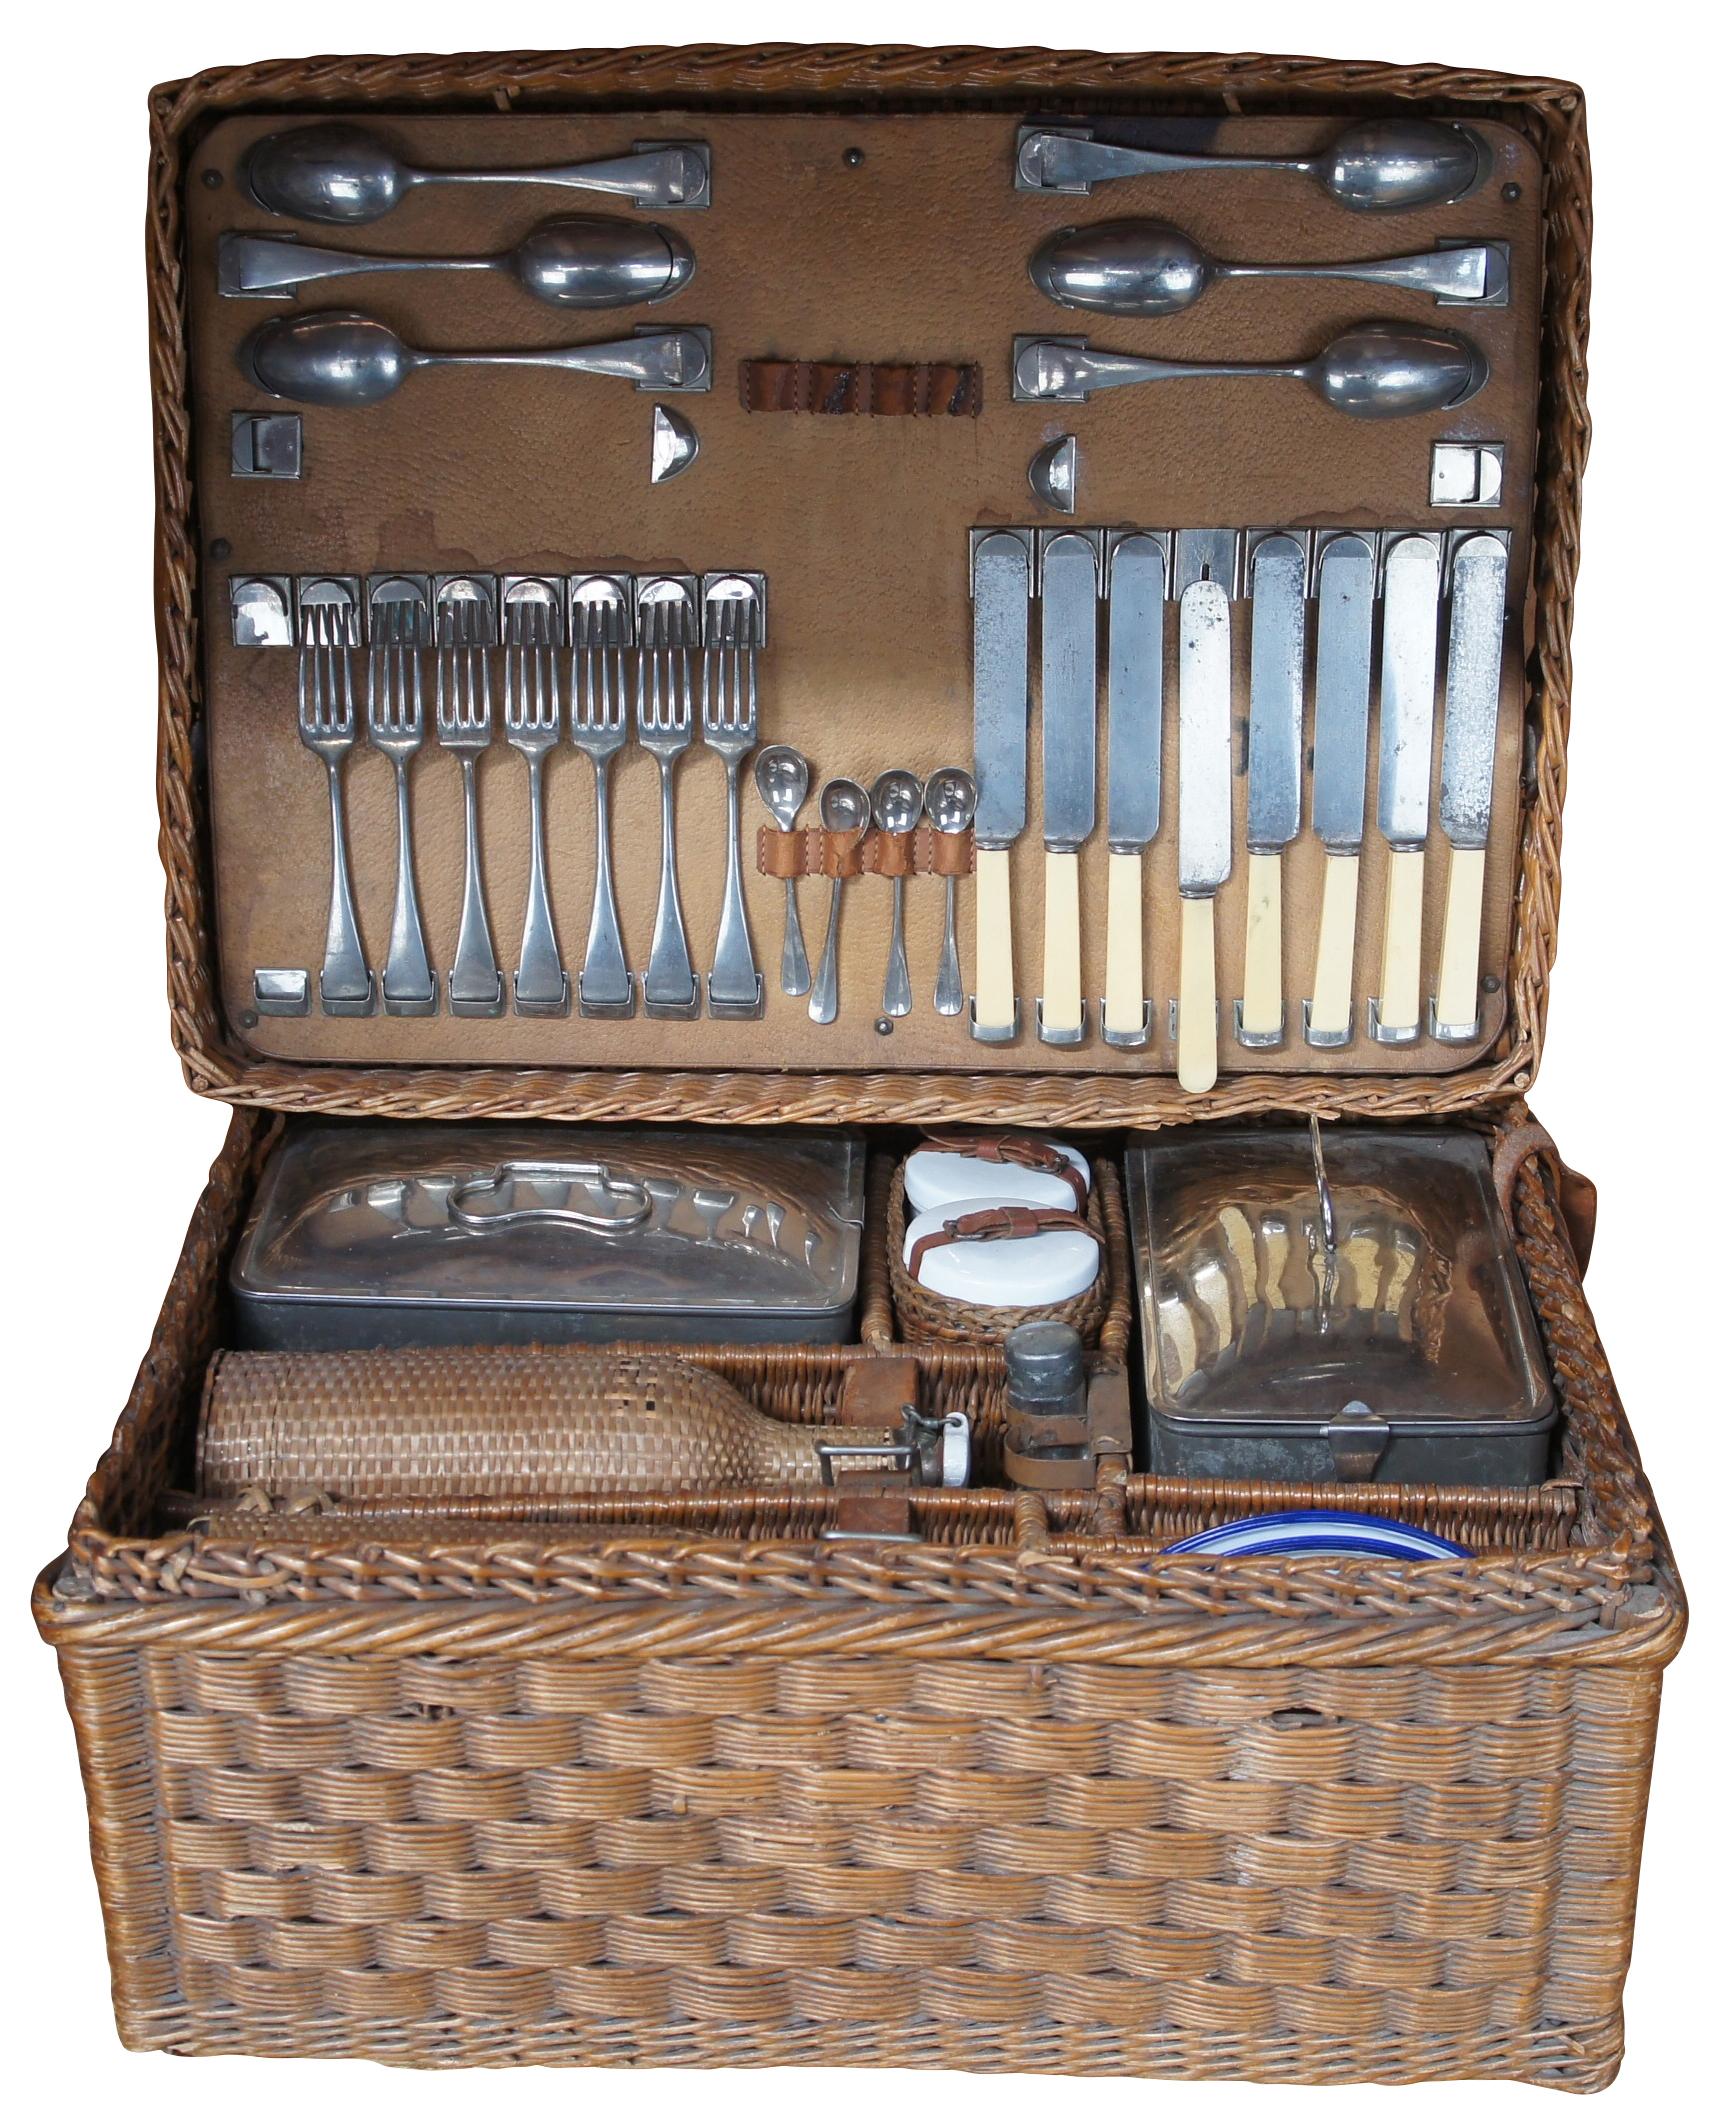 A lovely European Picnic set. Originally serviced 8. Includes Forks, spoons, knives, glass bottles, enamelware plates, drinking glasses, sandwich tins, bottle and can openers. Features an elaborate woven rattan case with compartments for storage.